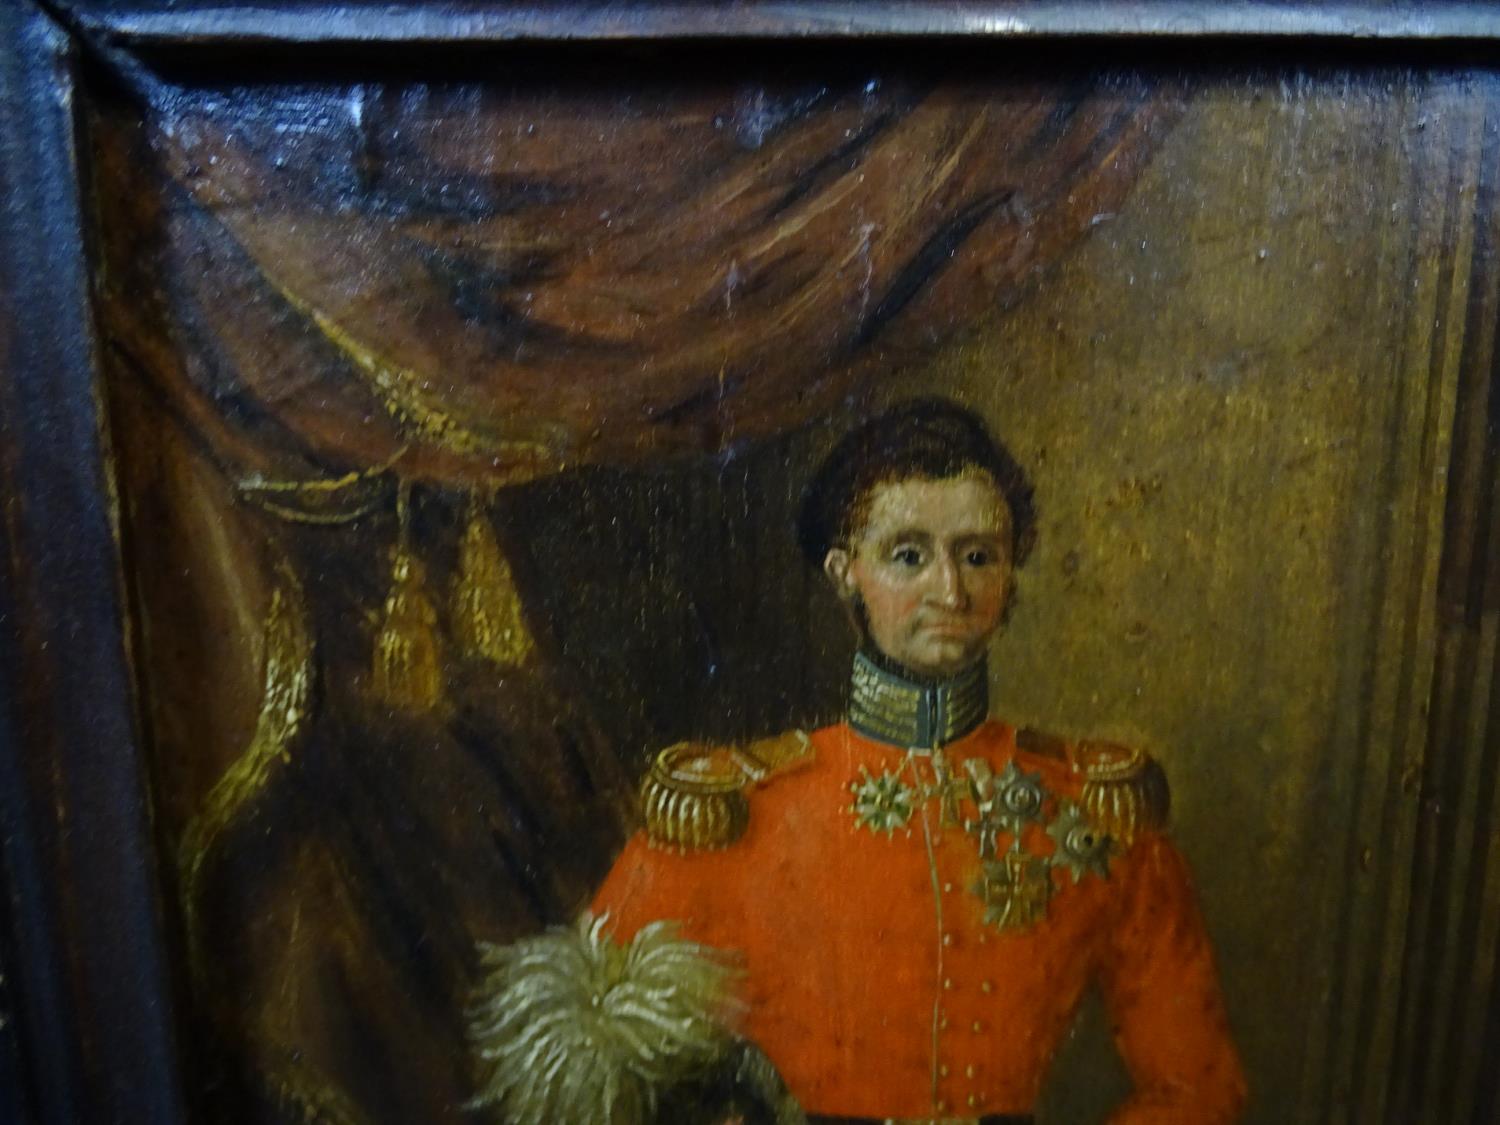 XIX Royal / Important German Nobility Oil on paper laid on panel, circa 1840 Portrait of Prince - Image 3 of 6